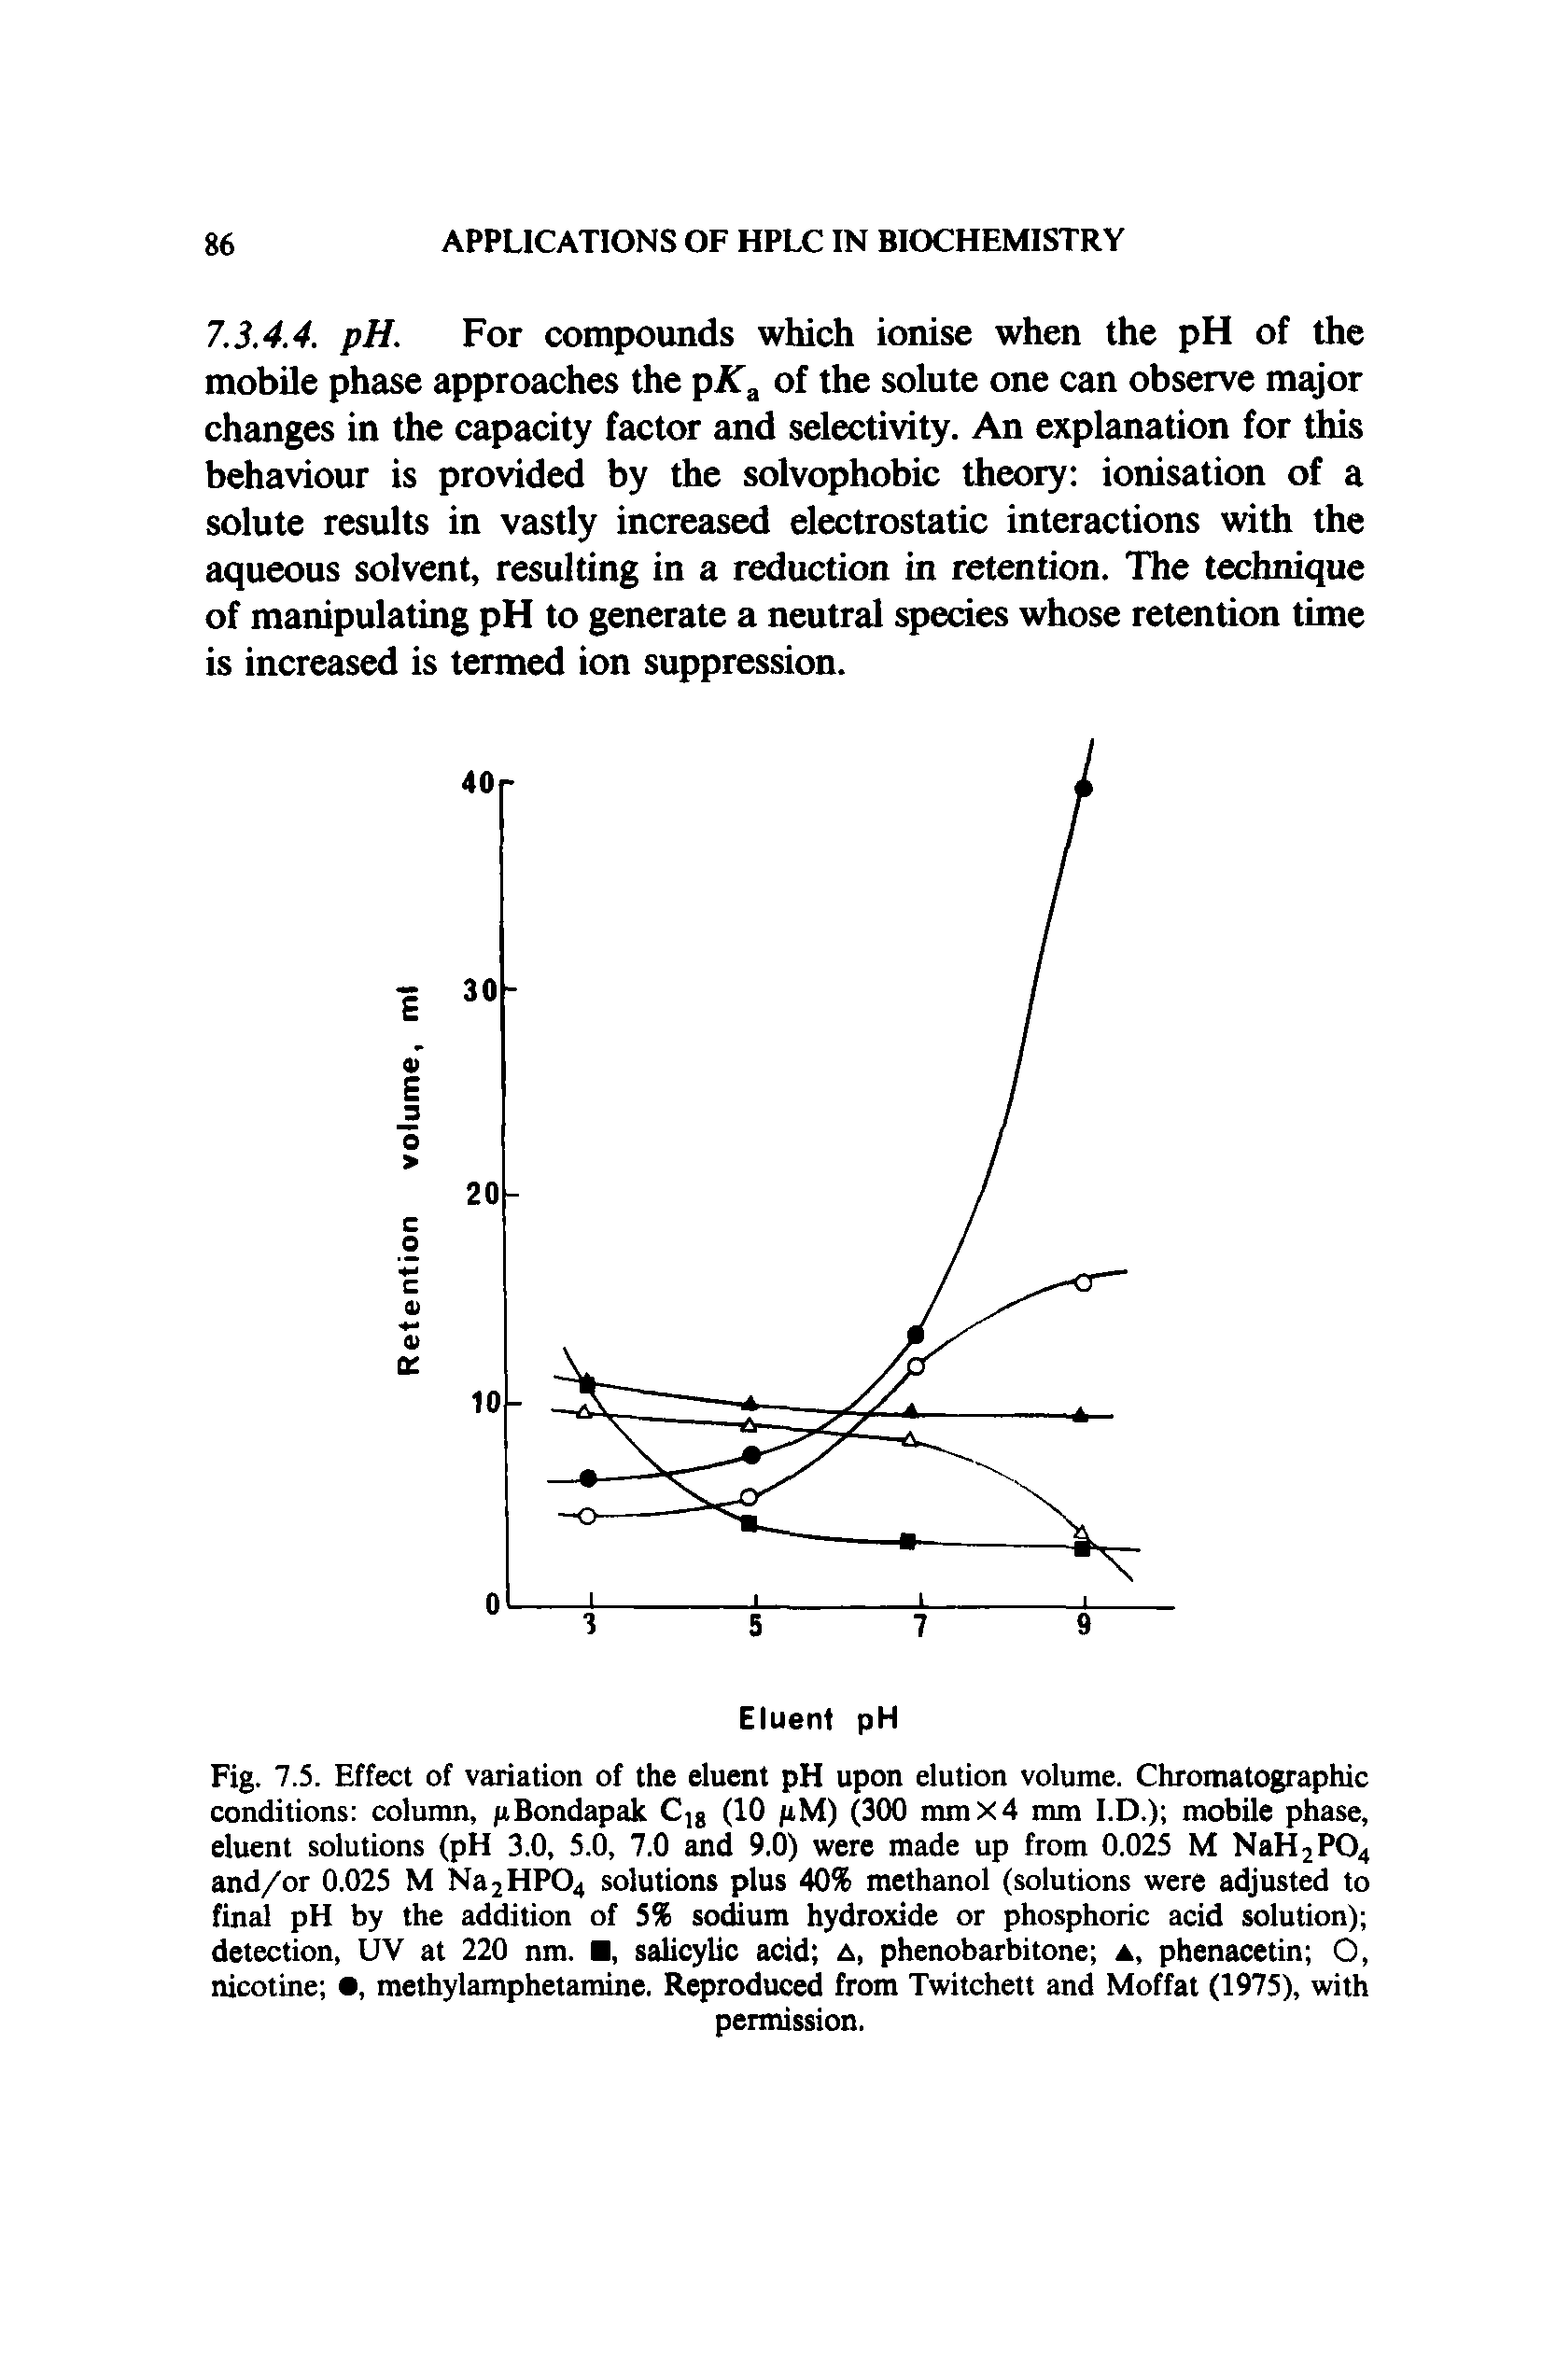 Fig. 7.5. Effect of variation of the eluent pH upon elution volume. Chromatographic conditions column, pBondapak Cjg (10 pM) (300 mmX4 mm I.D.) mobile phase, eluent solutions (pH 3.0, 5.0, 7.0 and 9.0) were made up from 0.025 M NaH2P04 and/or 0.025 M Na2HP04 solutions plus 40% methanol (solutions were adjusted to final pH by the addition of 5% sodium hydroxide or phosphoric acid solution) detection, UV at 220 nm. , salicylic acid a, phenobarbitone a, phenacetin O, nicotine , methylamphetamine. Reproduced from Twitchett and Moffat (1975), with...